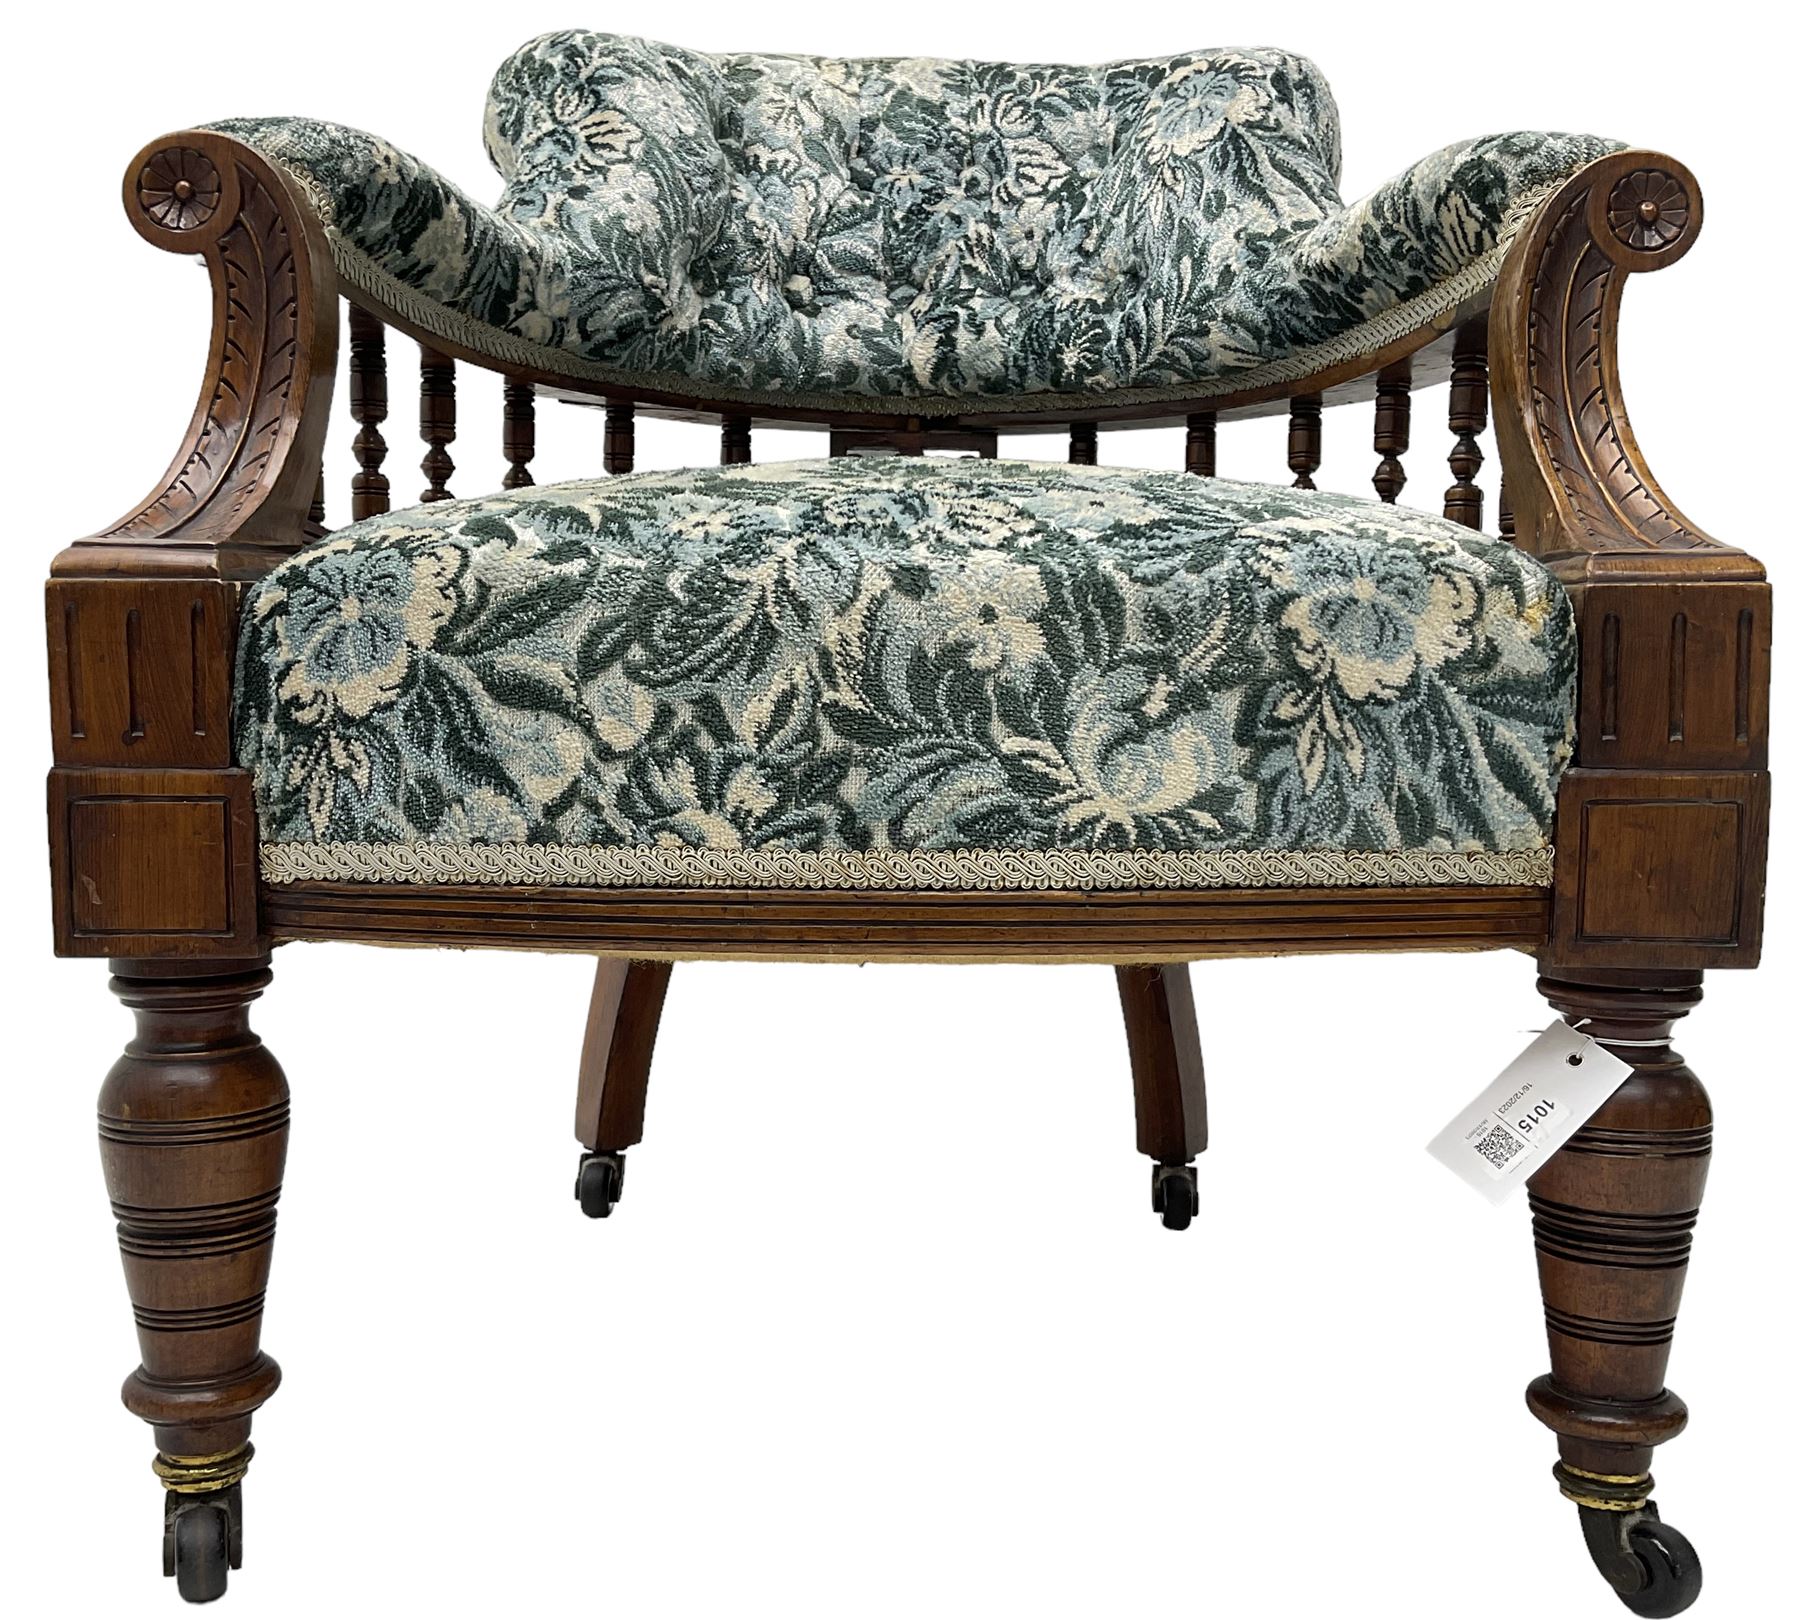 Victorian walnut framed tub-shaped armchair - Image 4 of 7